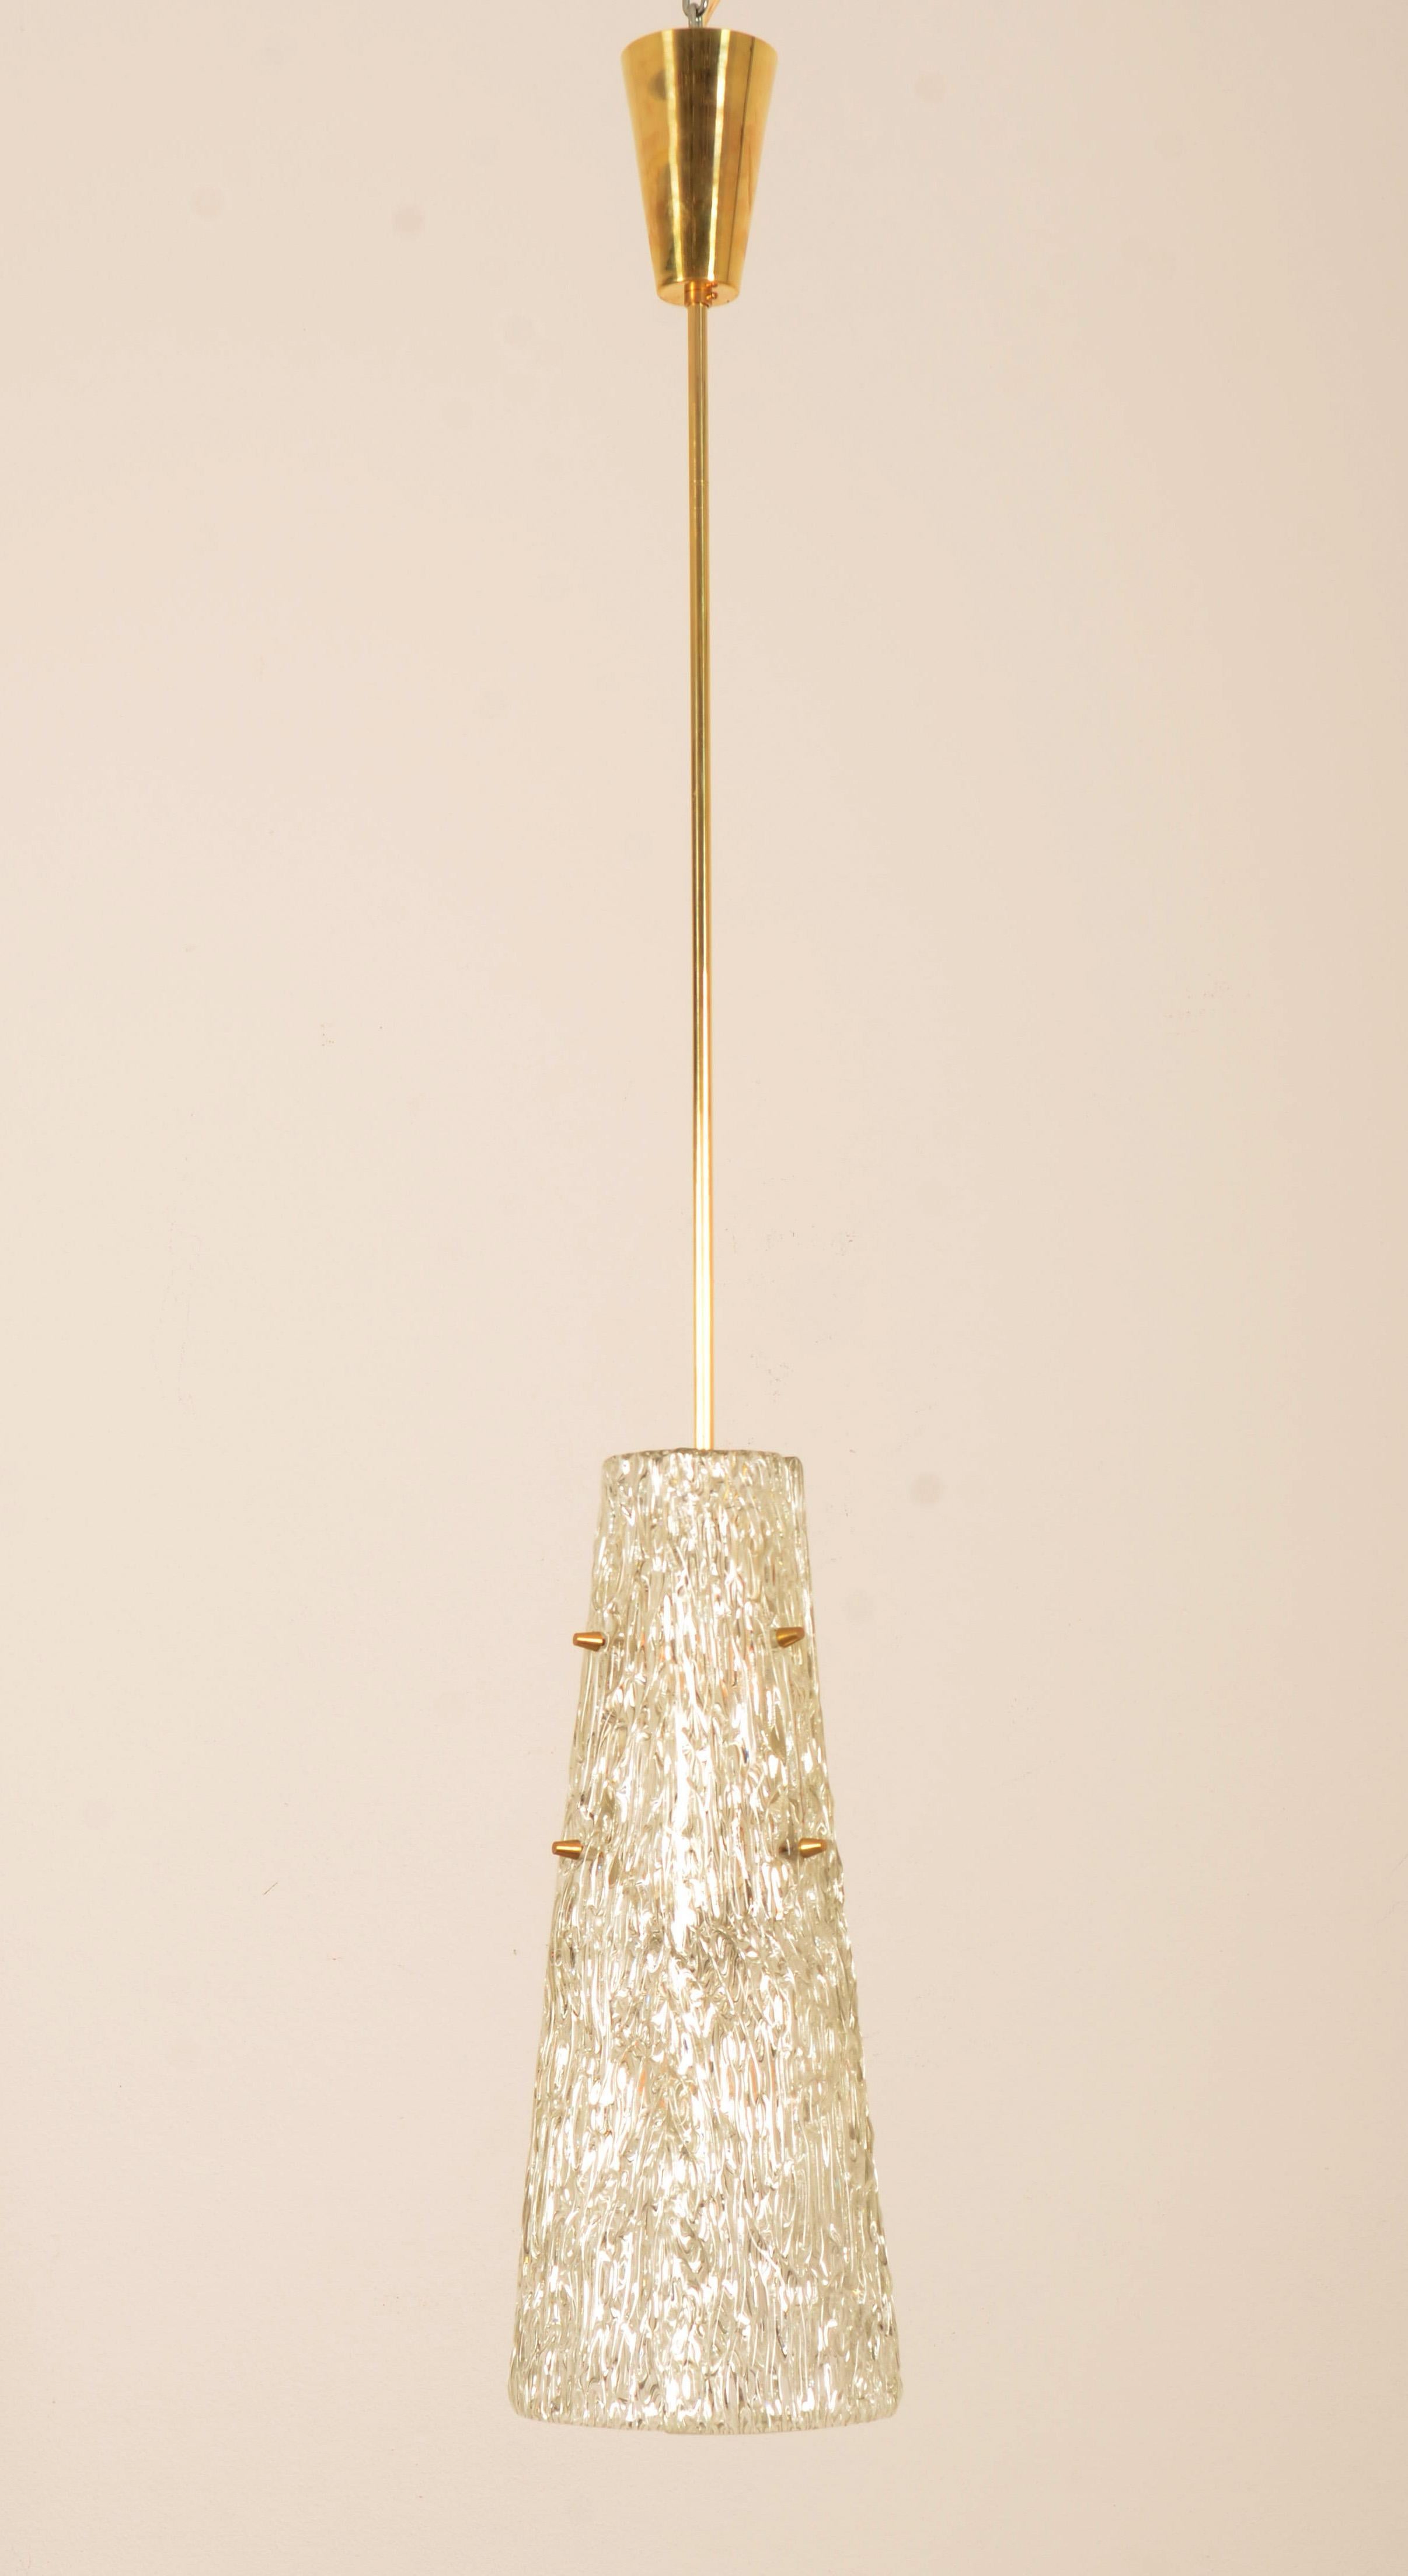 Midcentury J.T. Kalmar Crystal Structured Glass Pendant Lamp In Good Condition For Sale In Vienna, AT